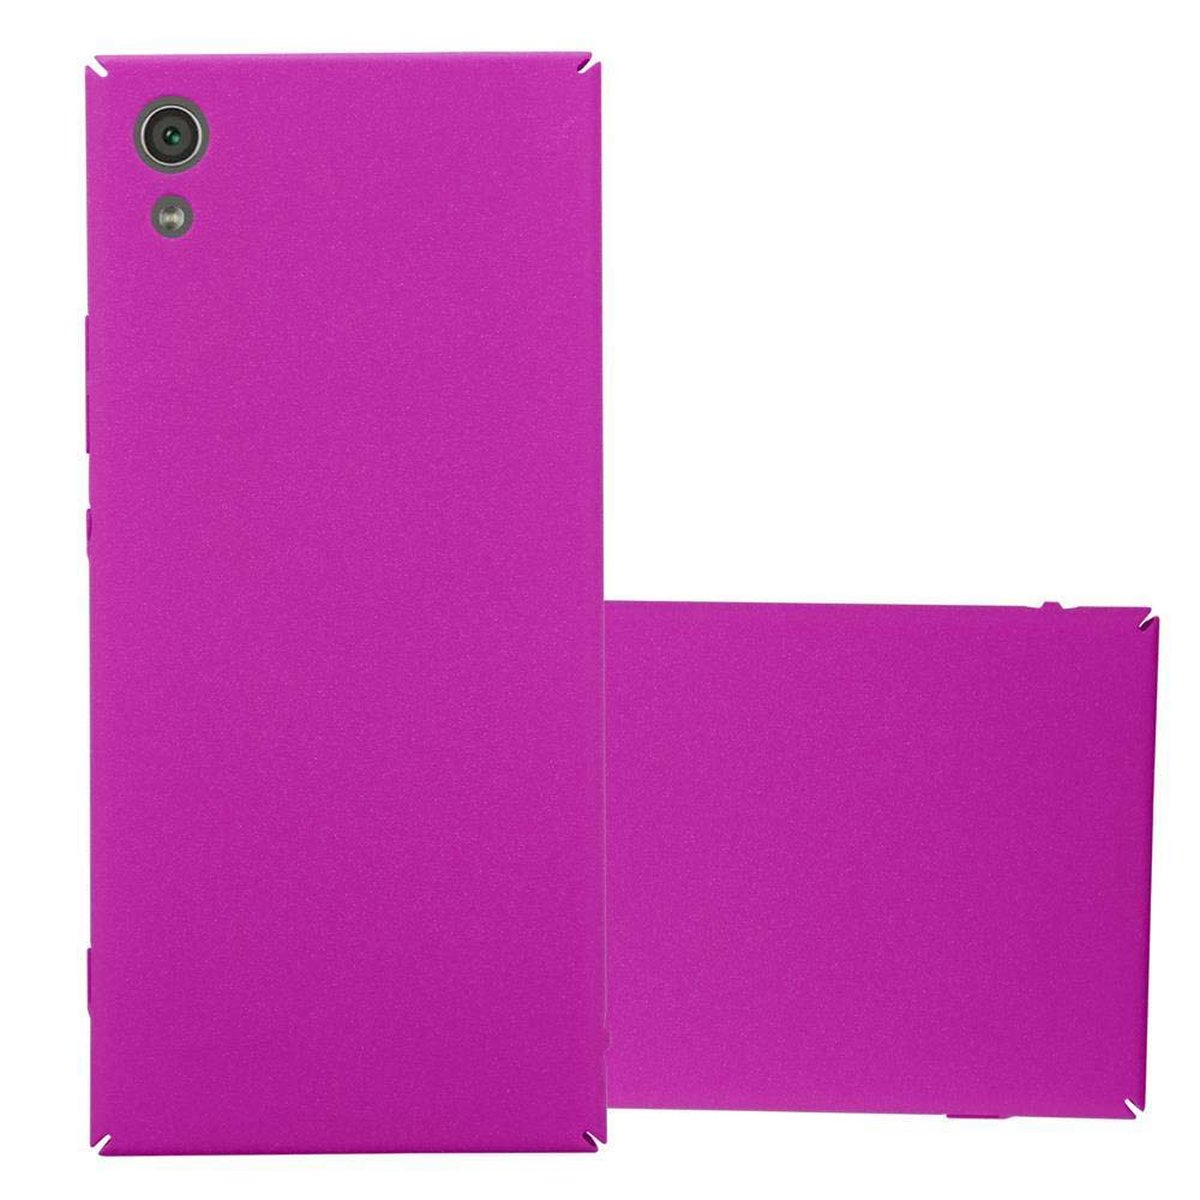 Hard Sony, Backcover, Frosty PINK Case FROSTY Xperia Style, Hülle CADORABO im XA1,